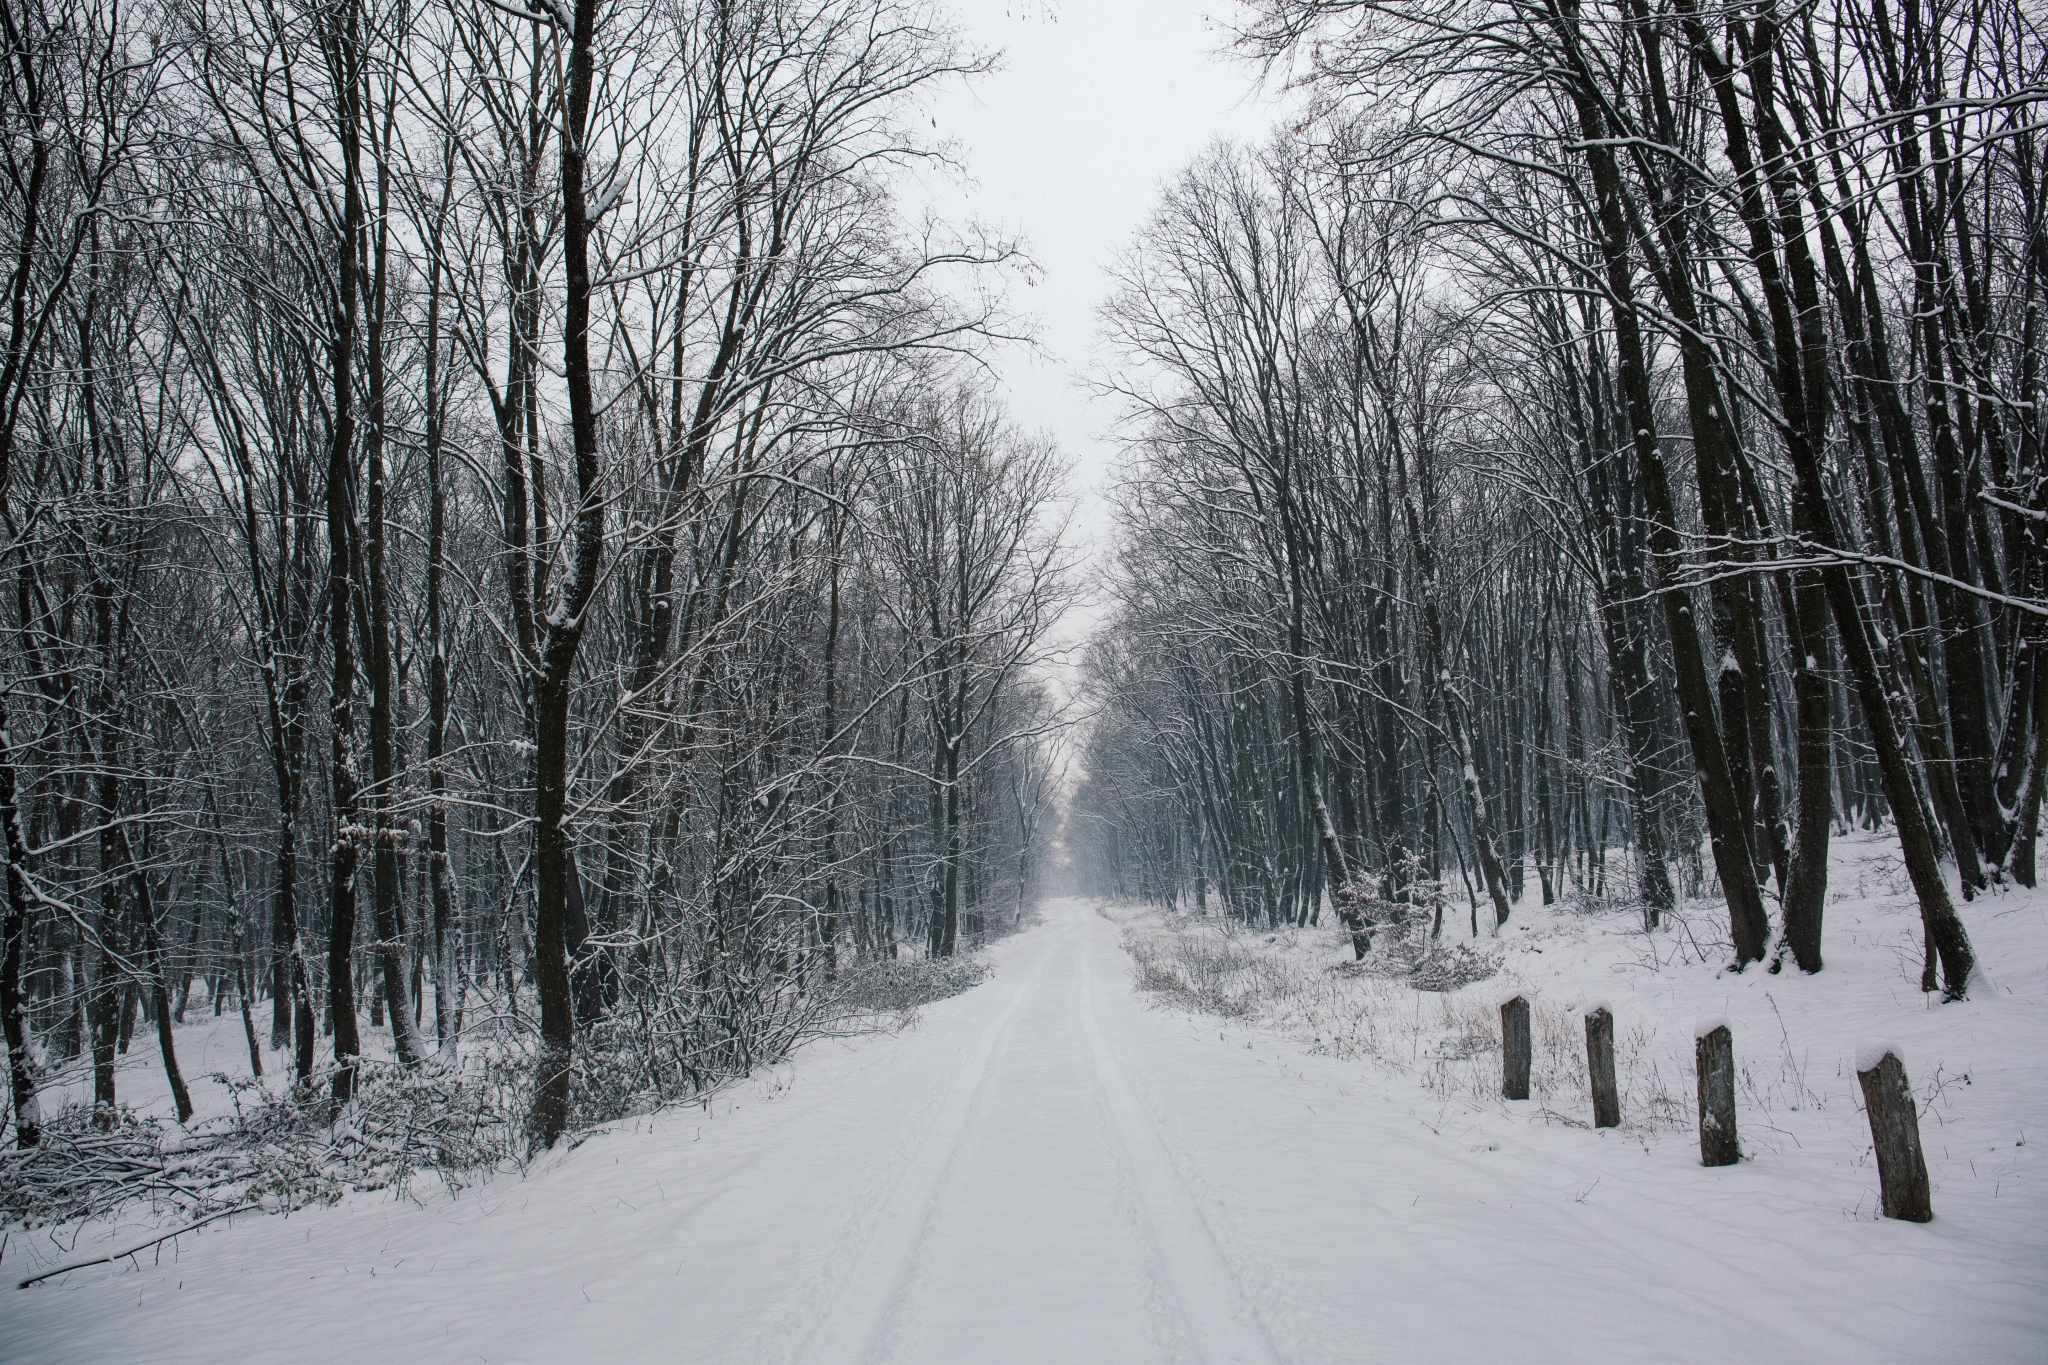 5 Tips For Snowy Winter RVing